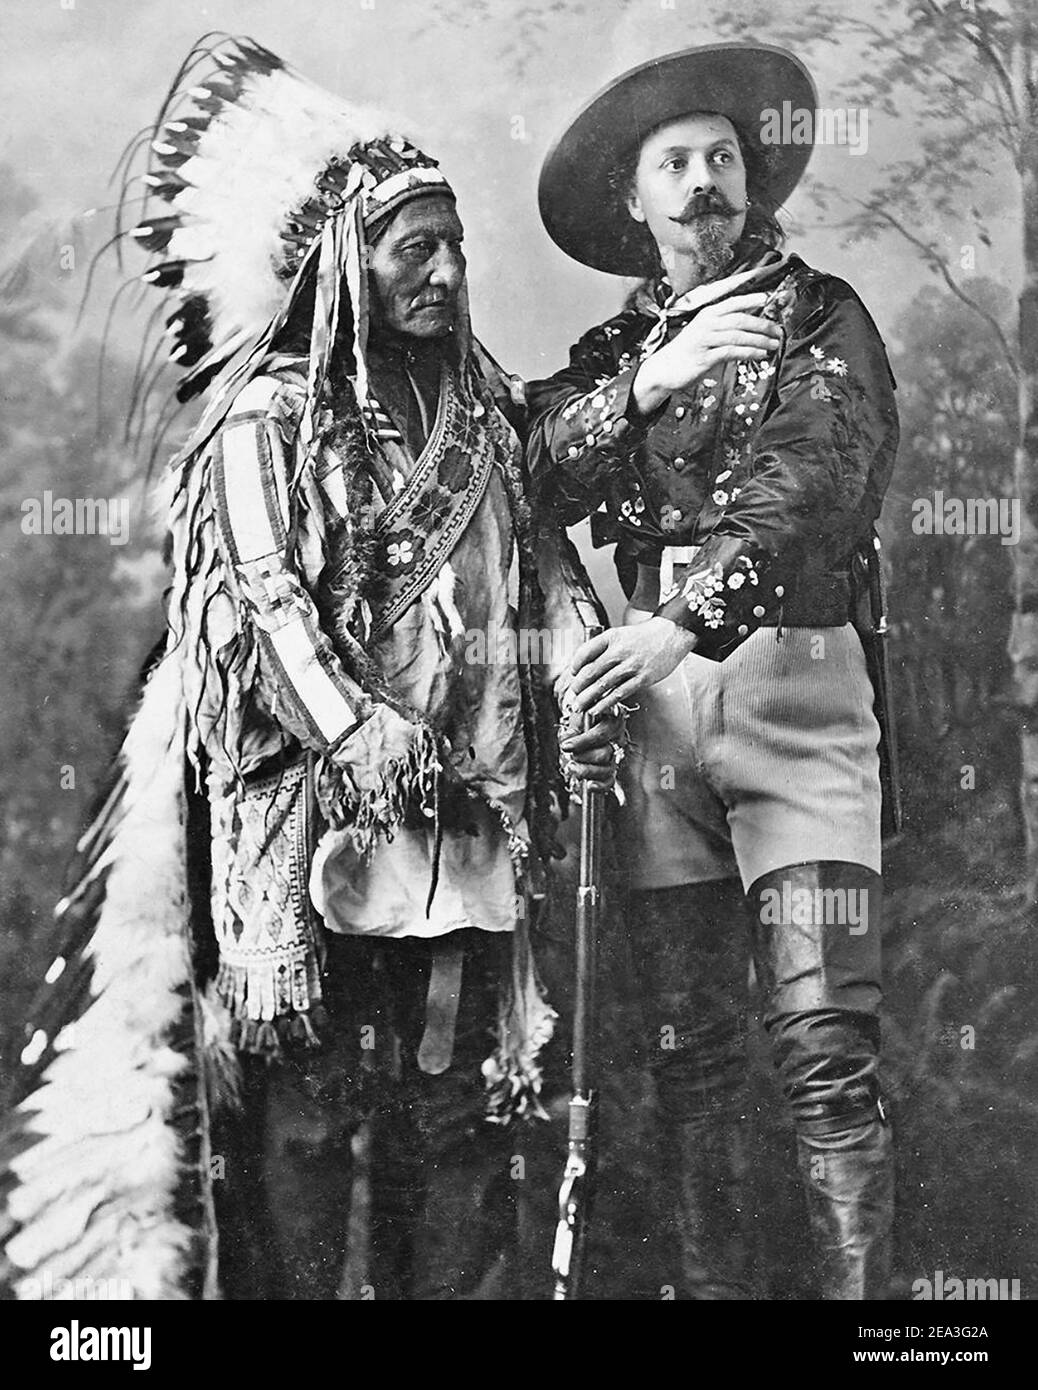 BUFFALO BILL (1846-1917) American showman at right with Sitting Bull in 1885 when he had joined the travelling  Wild West show. Stock Photo